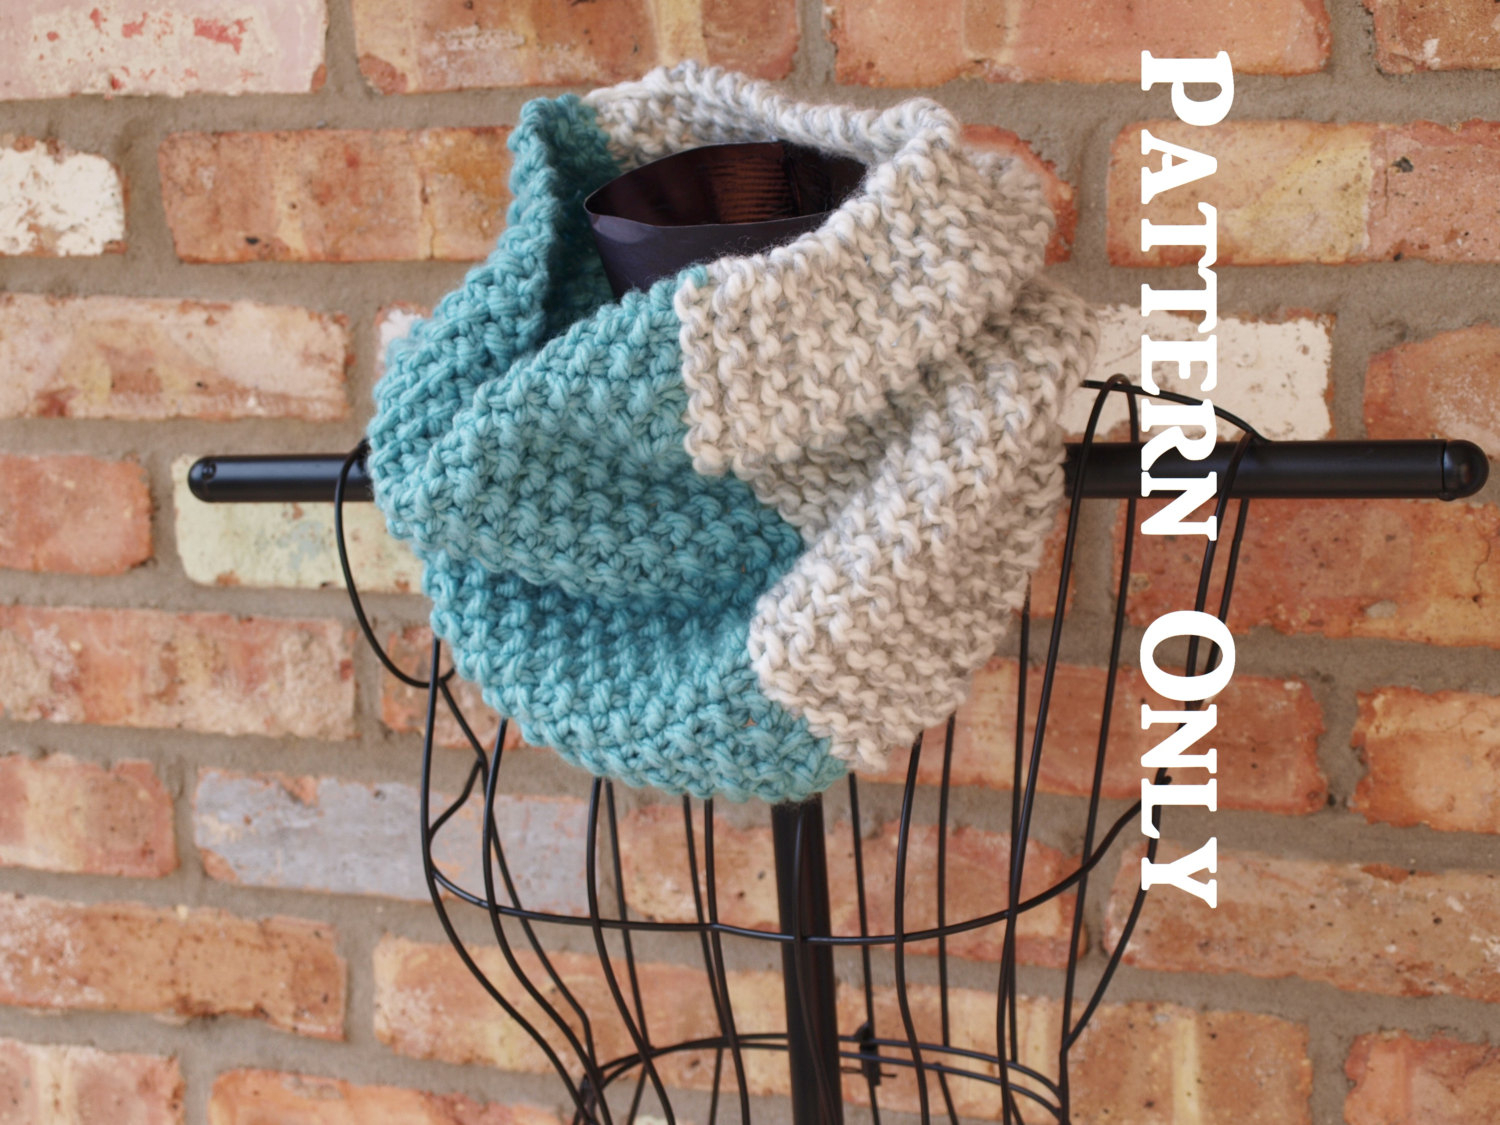 Knit Cowl Scarf Pattern Pattern Sale Knit Cowl Scarf Pattern Color Blocked Garter Stitch Cowl Seed Stitch Moss Stitch Cowl Beginner Cowl Easy Scarf Pattern